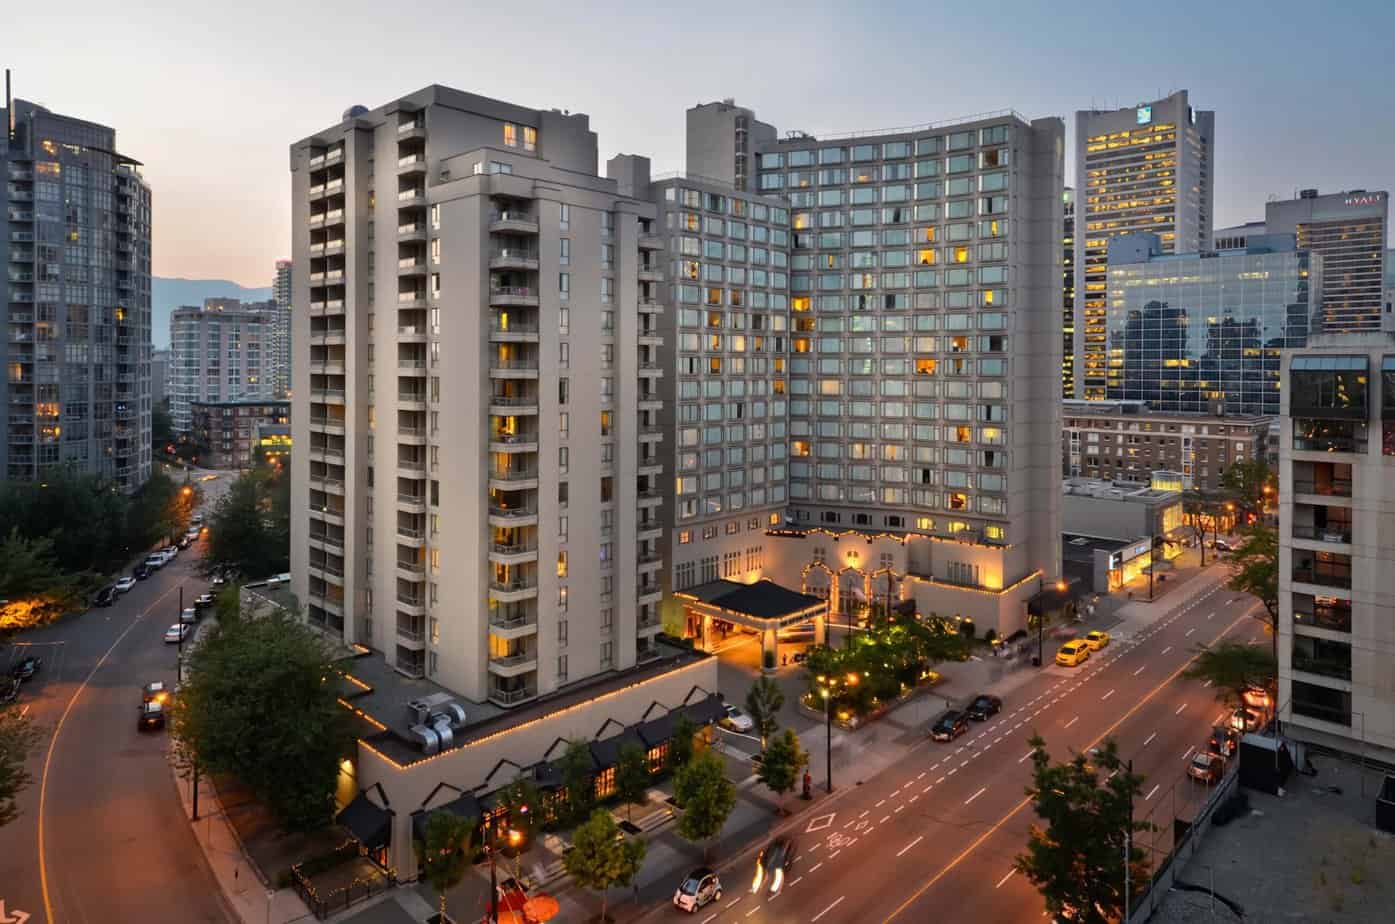 Outdoor arial view of The Sutton Hotel on an diagonal angle. The picture was taken during sunset so the lights are turned on down below. The Sutton Hotel is a beautiful hotel to stay in Downtown Vancouver.